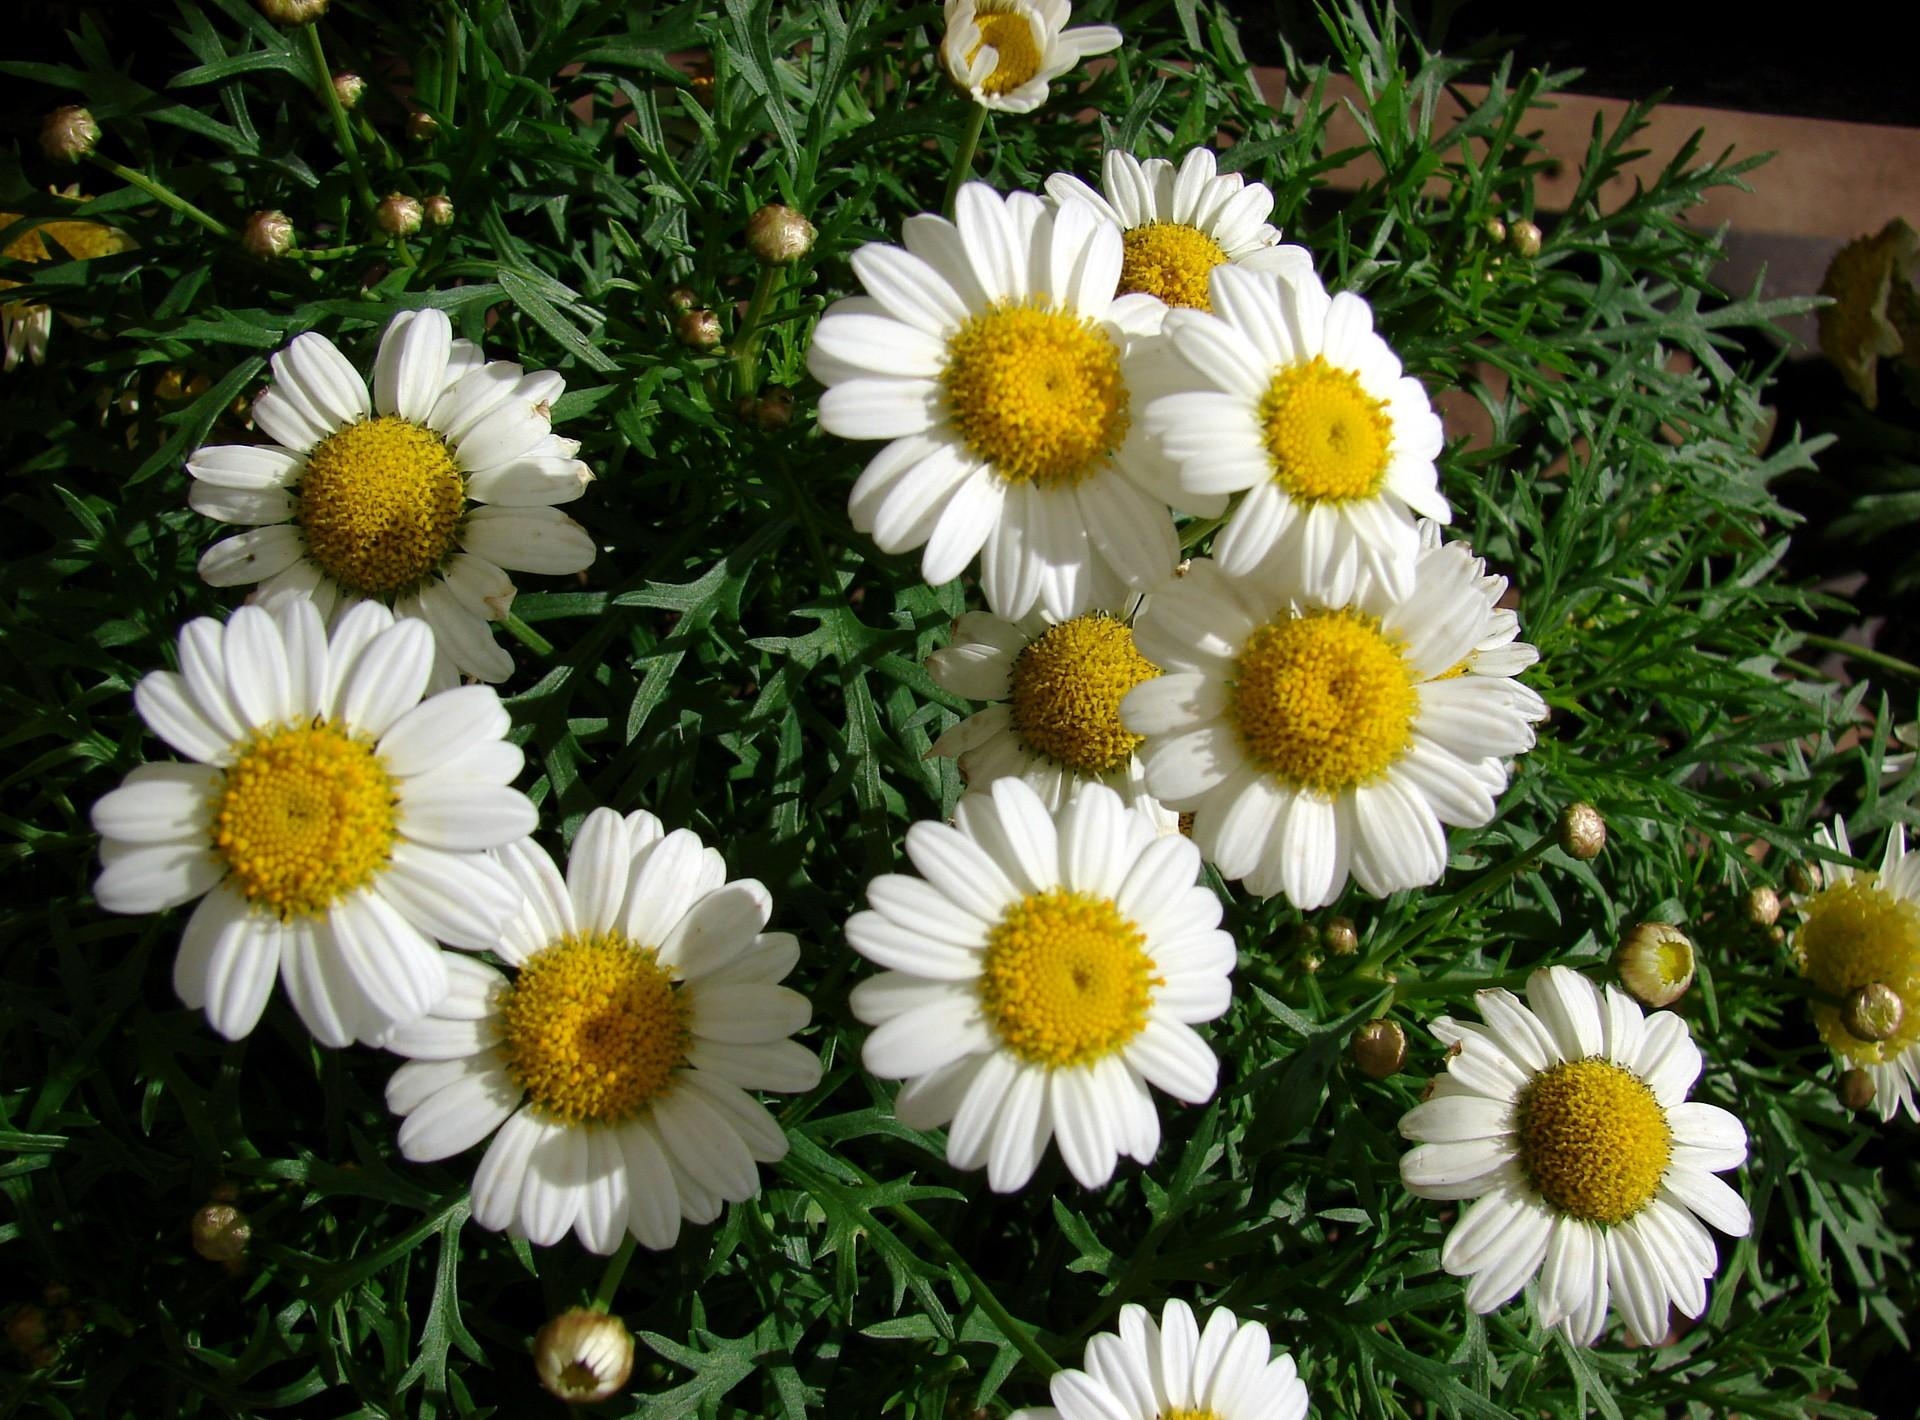 New Lock Screen Wallpapers flower bed, flowers, camomile, white, greens, flowerbed, snow white